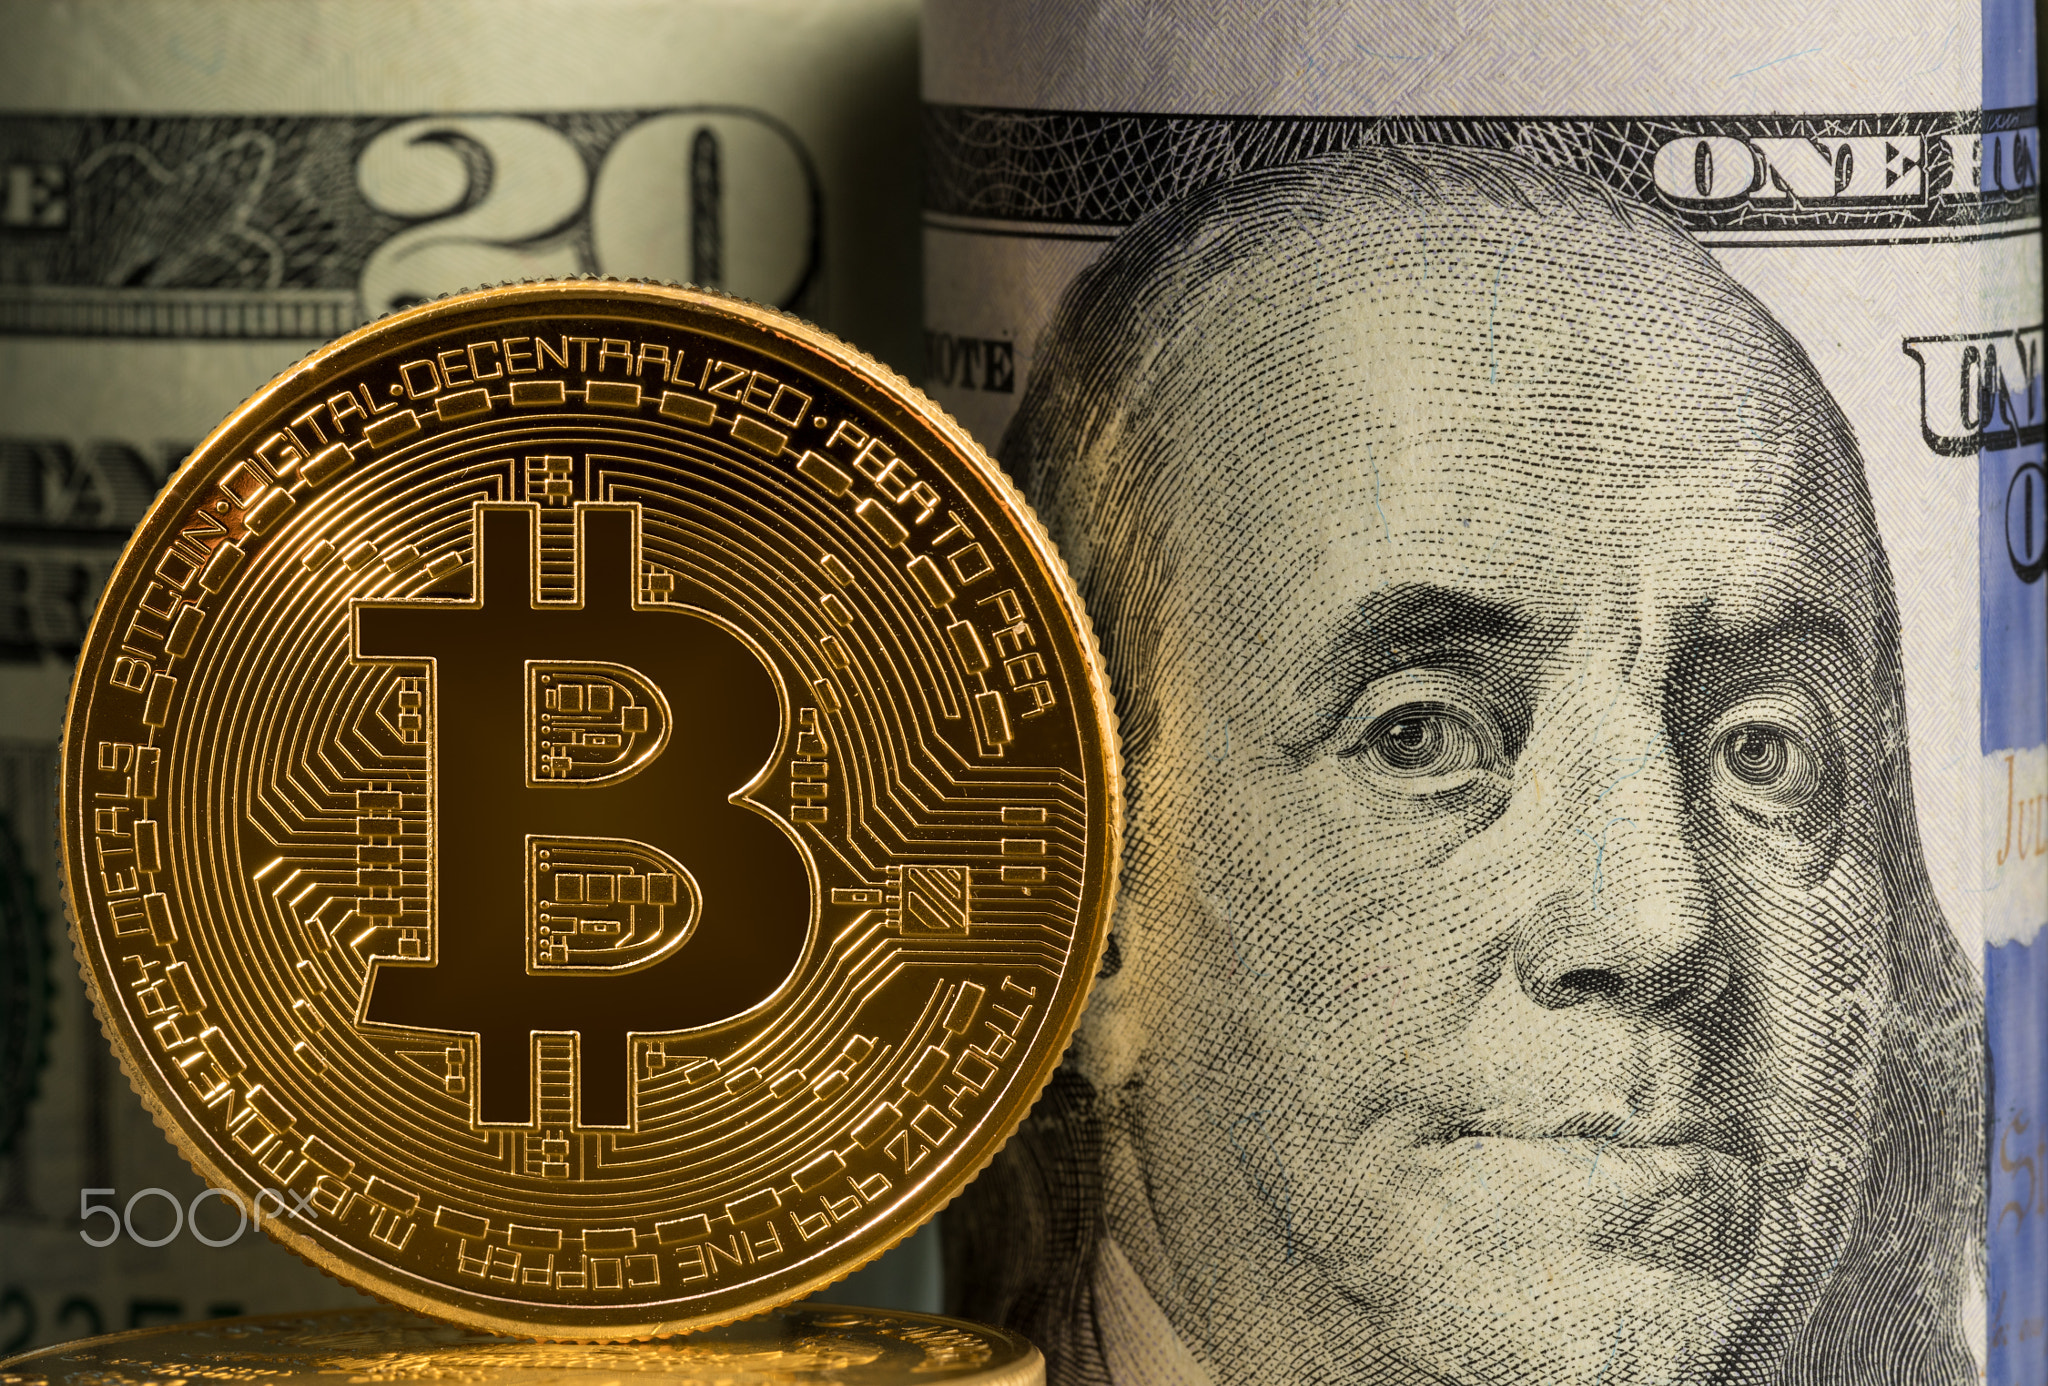 Bitcoin coin in front of bank rolls of US currency